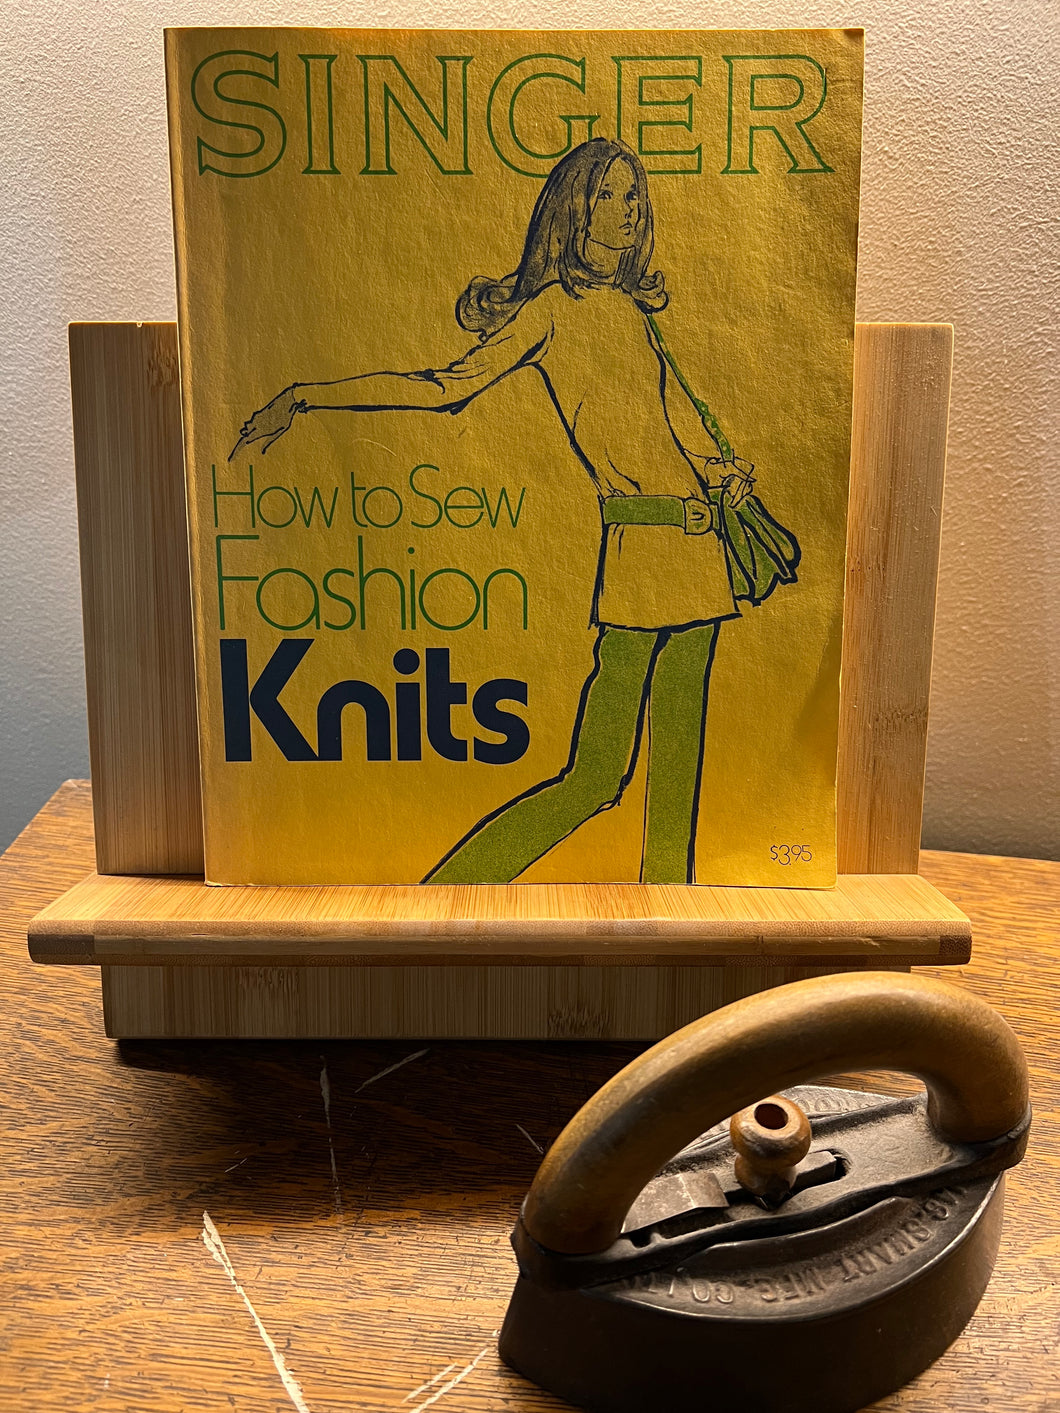 Singer.  How to Sew Fashion Knits